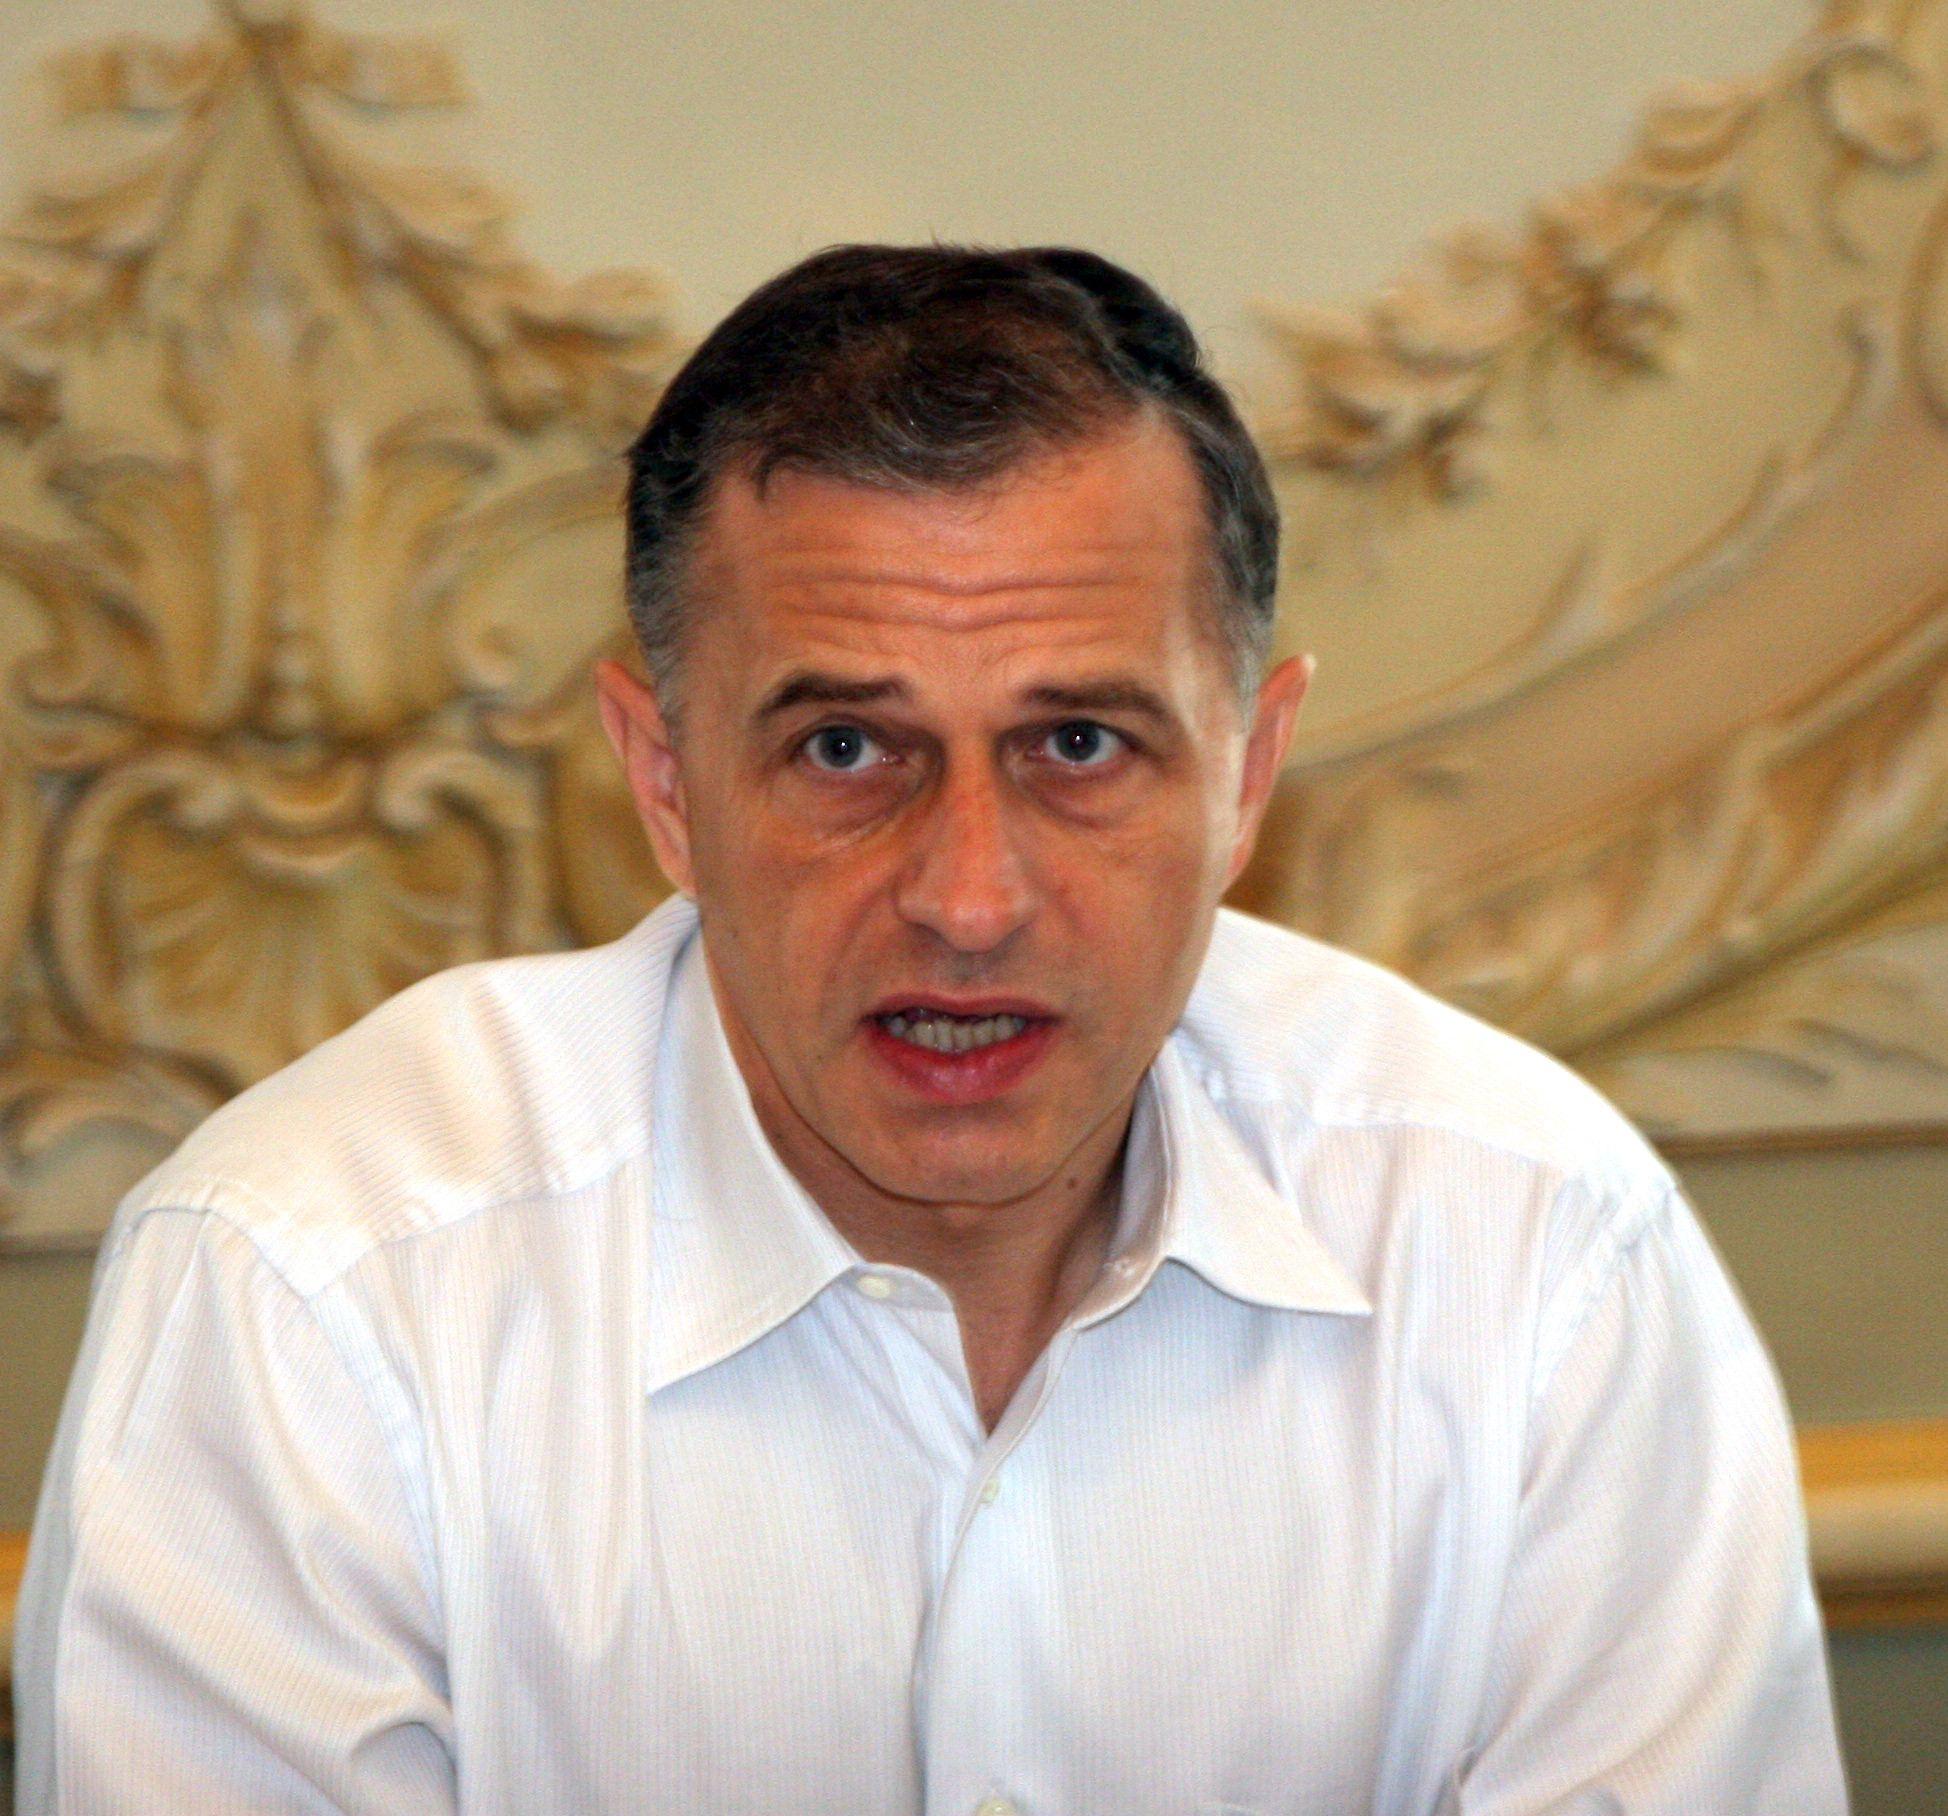 In the Agerpres archive there is a photograph dated July 18, 2005, the day Mircea Geoană defended his doctorate. Geoană was photographed during the meeting of the PSD National Permanent Bureau (PHOTO: AGERPRES / Lucian Tudose)